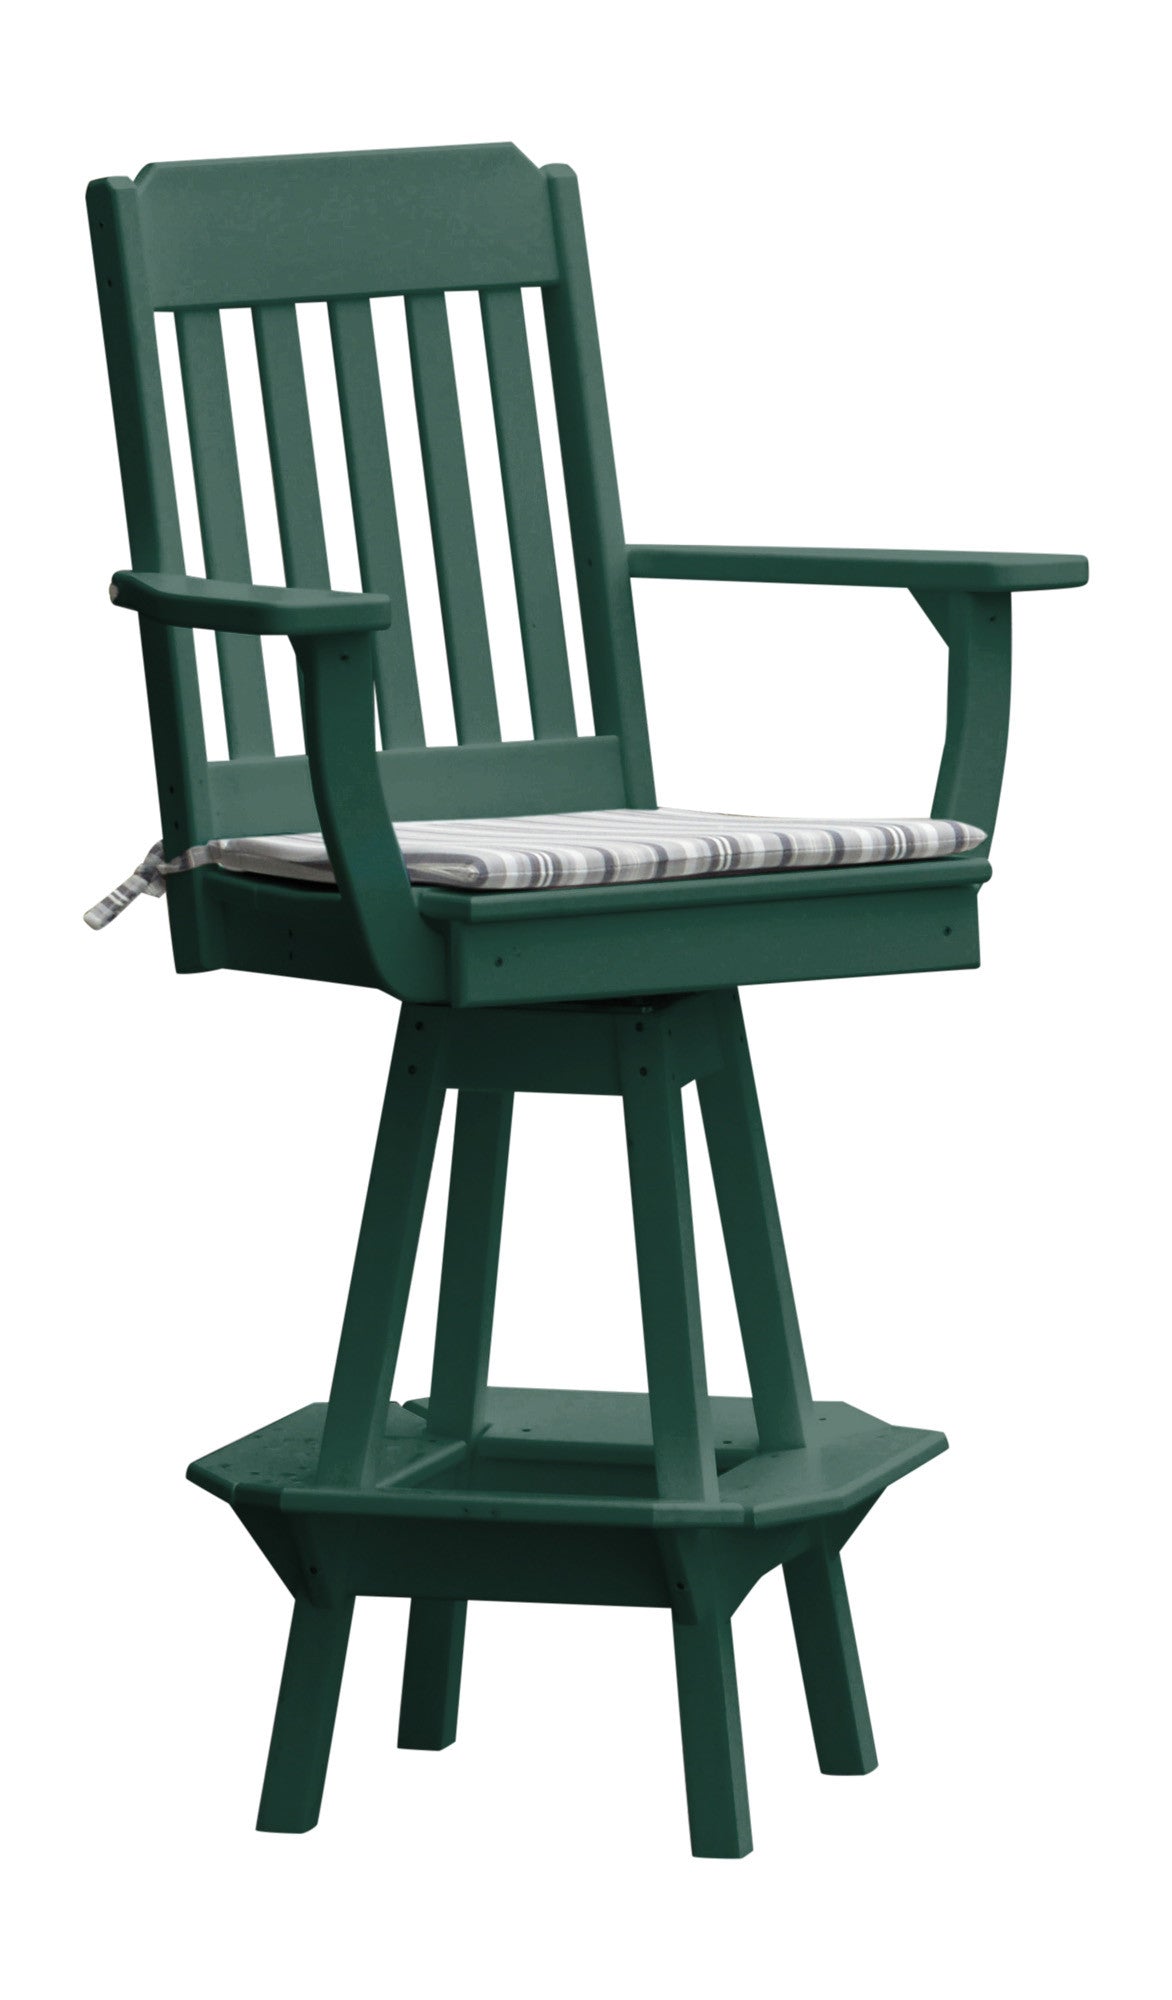 A&L Furniture Company Recycled Plastic Traditional Swivel Bar Chair w/ Arms - Turf Green